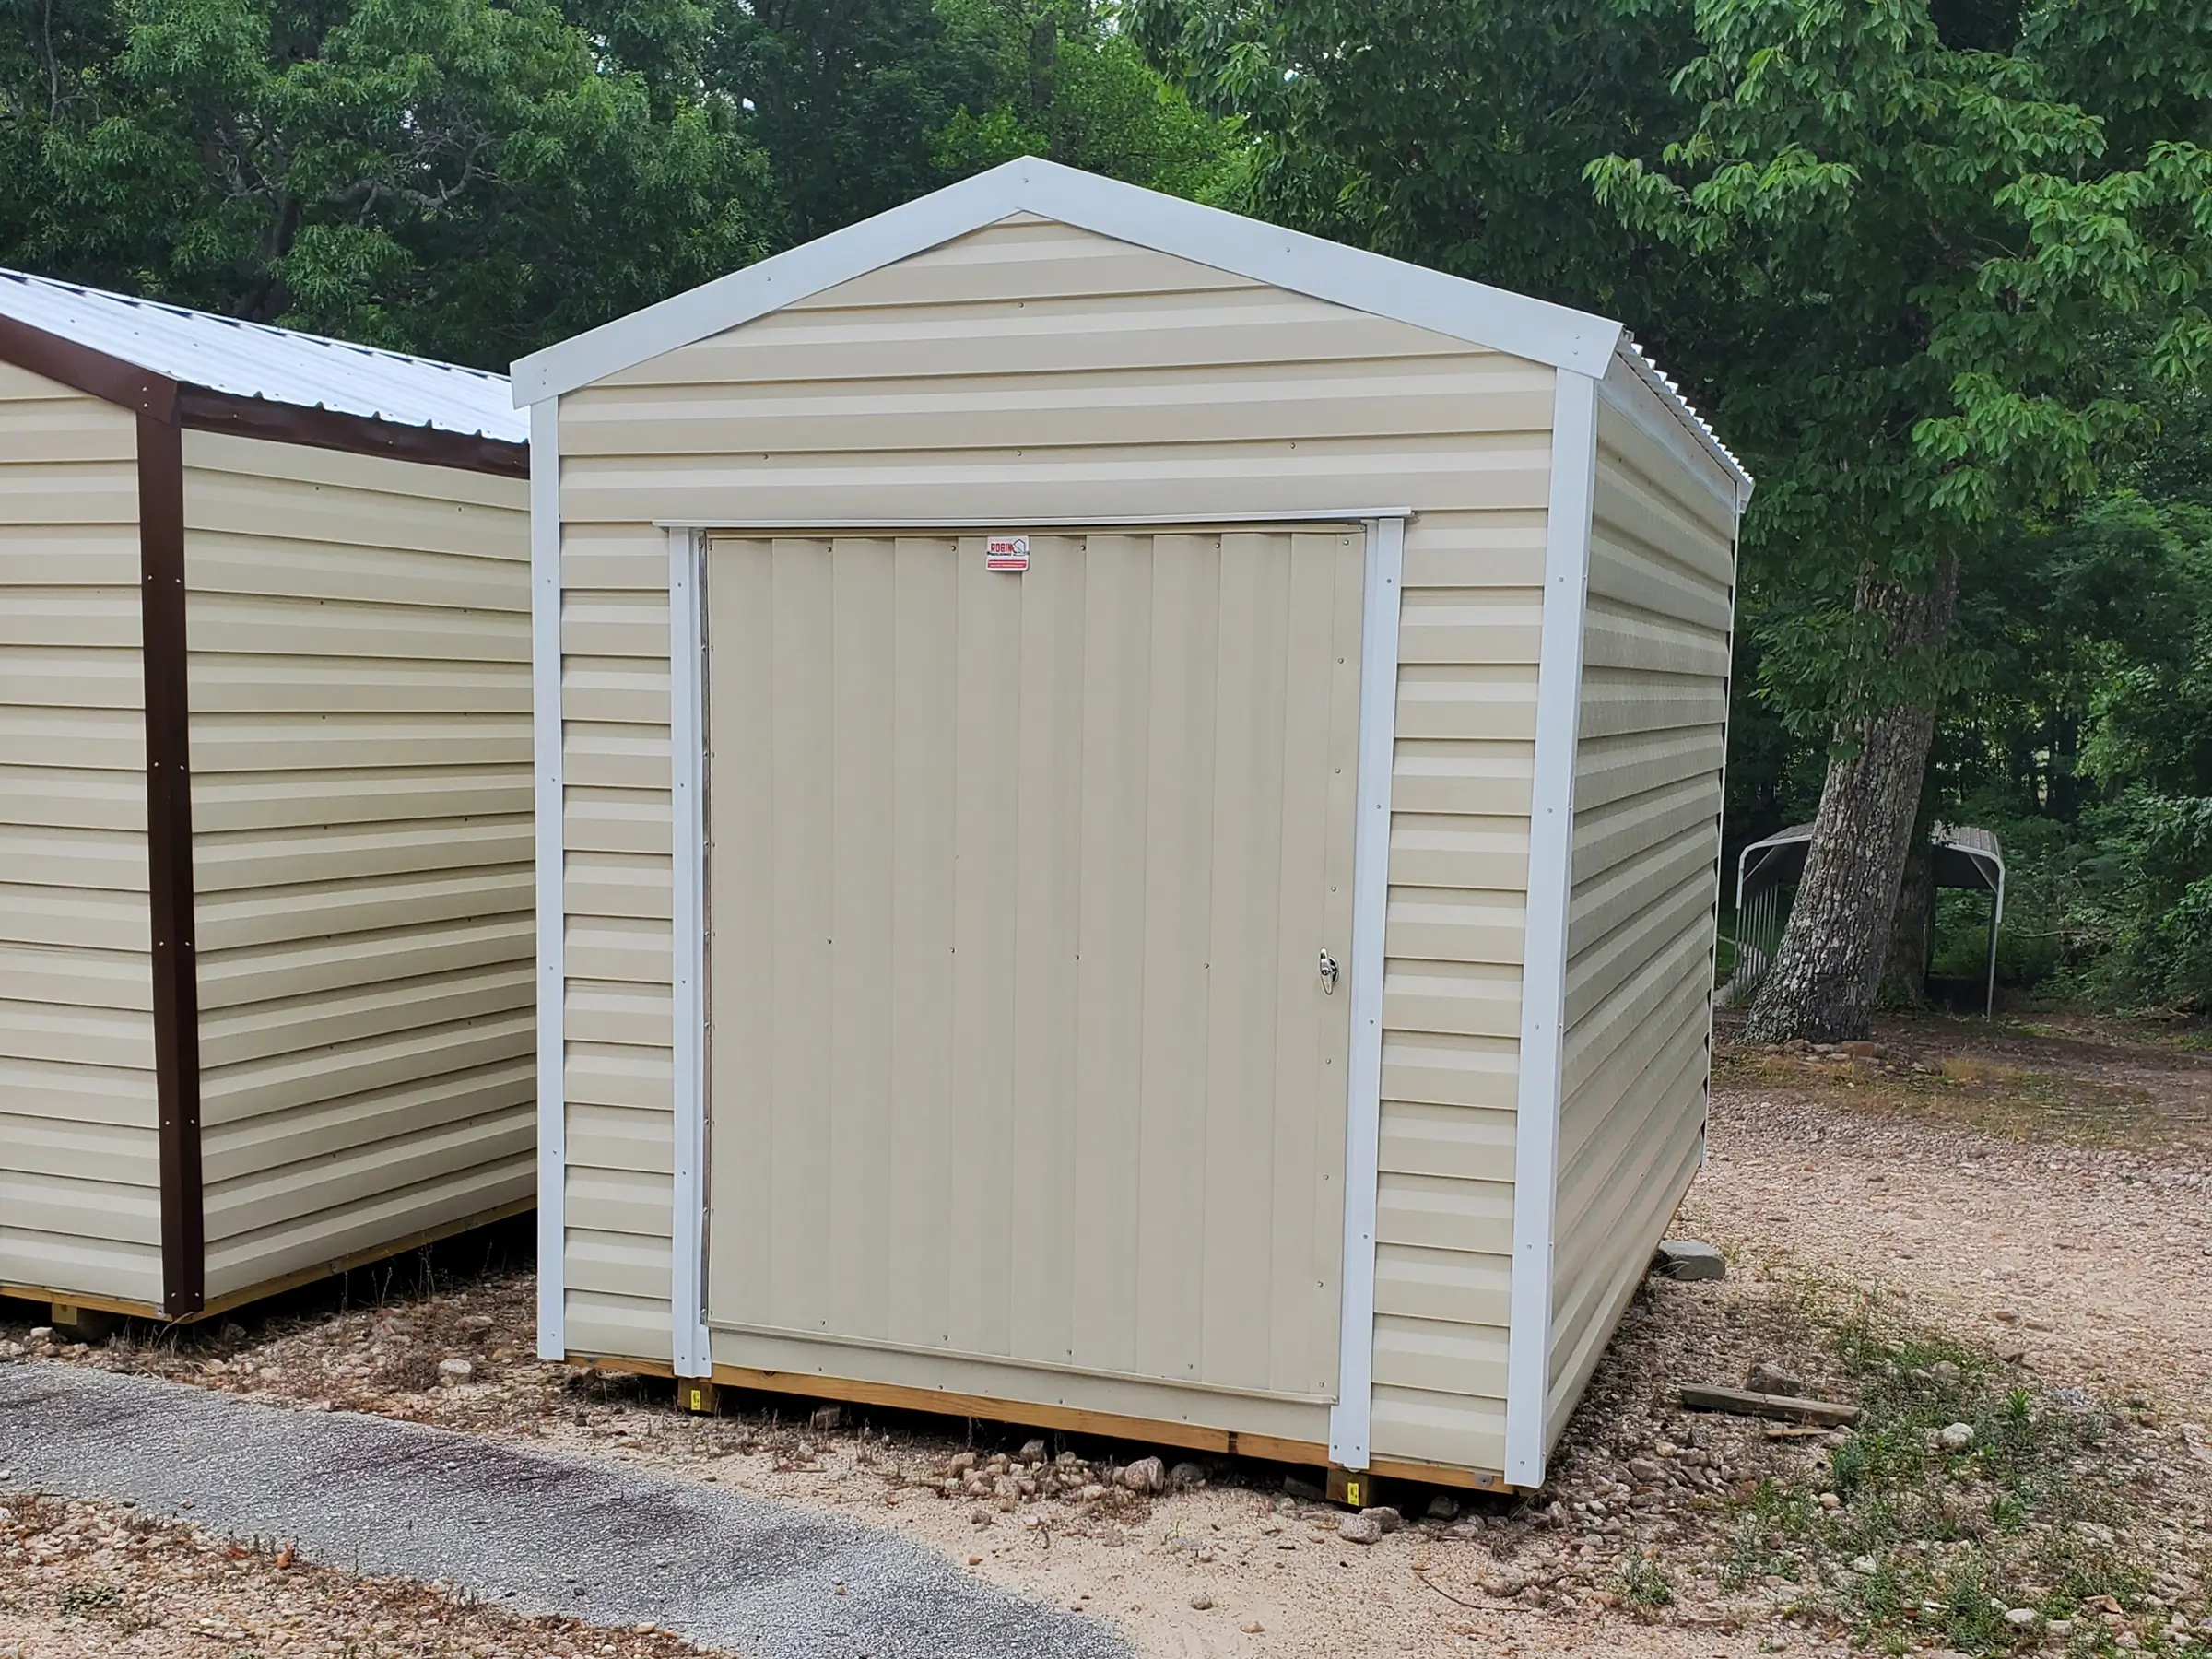 8 by 12 portable storage building equipped with an extra wide door for your motorcycle or riding lawn mower.